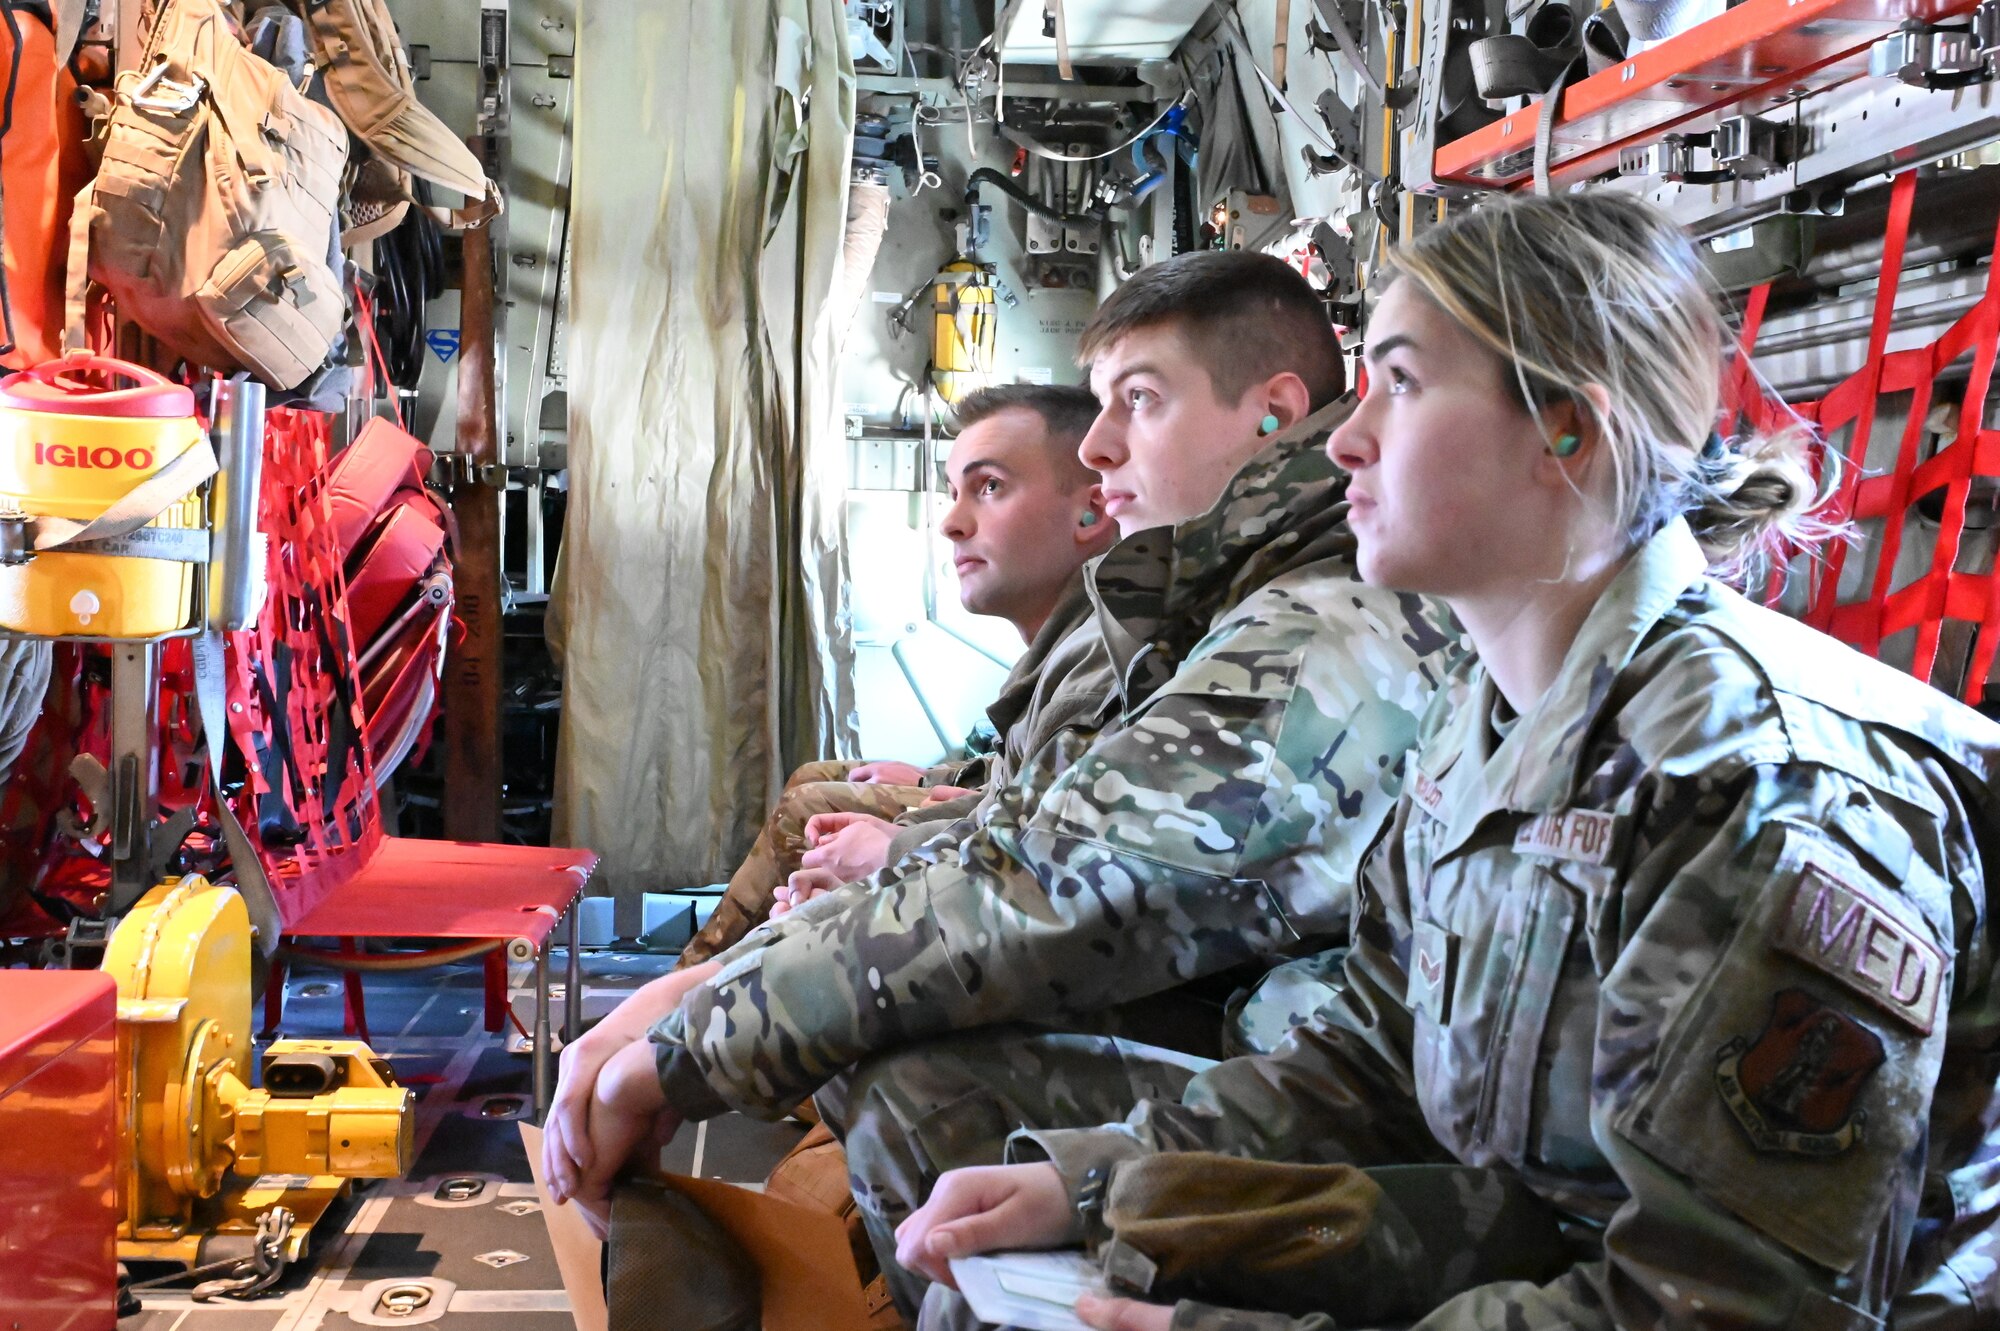 Airmen from the 174th Attack Wing listen to instruction during a ride on a C-130. The flight was intended to simulate a flight to another country and is part of a week-long deployment readiness exercise.  (U.S. Air National Guard photo by Staff Sgt. Duane Morgan)